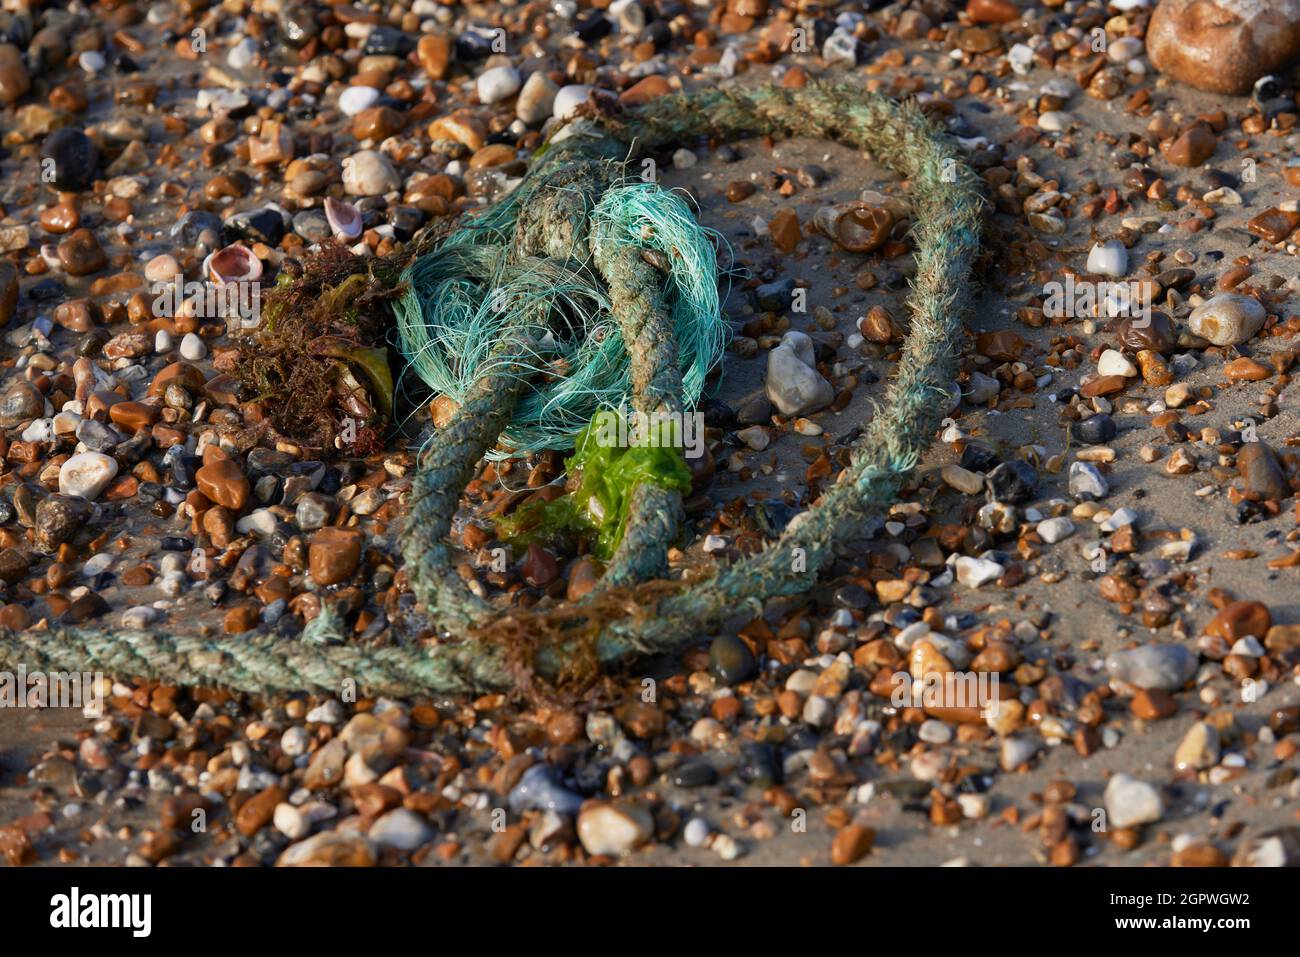 Discarded plastic rope and fishing net washed up on shore - Stock Image -  C048/3594 - Science Photo Library